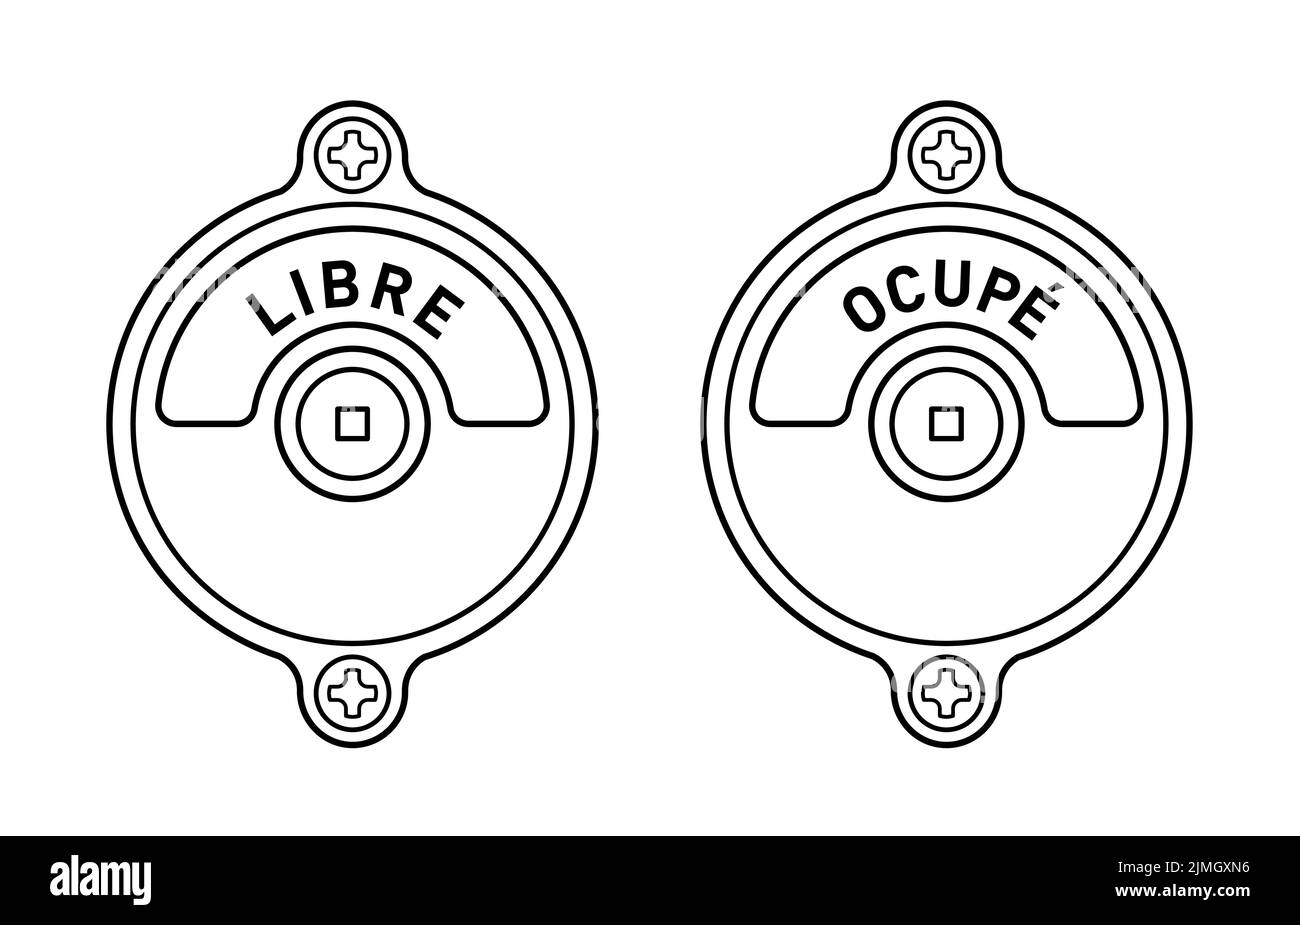 Vector illustration set of public toilet door locks with french text, libre for vacant, ocupe for occupied Stock Vector